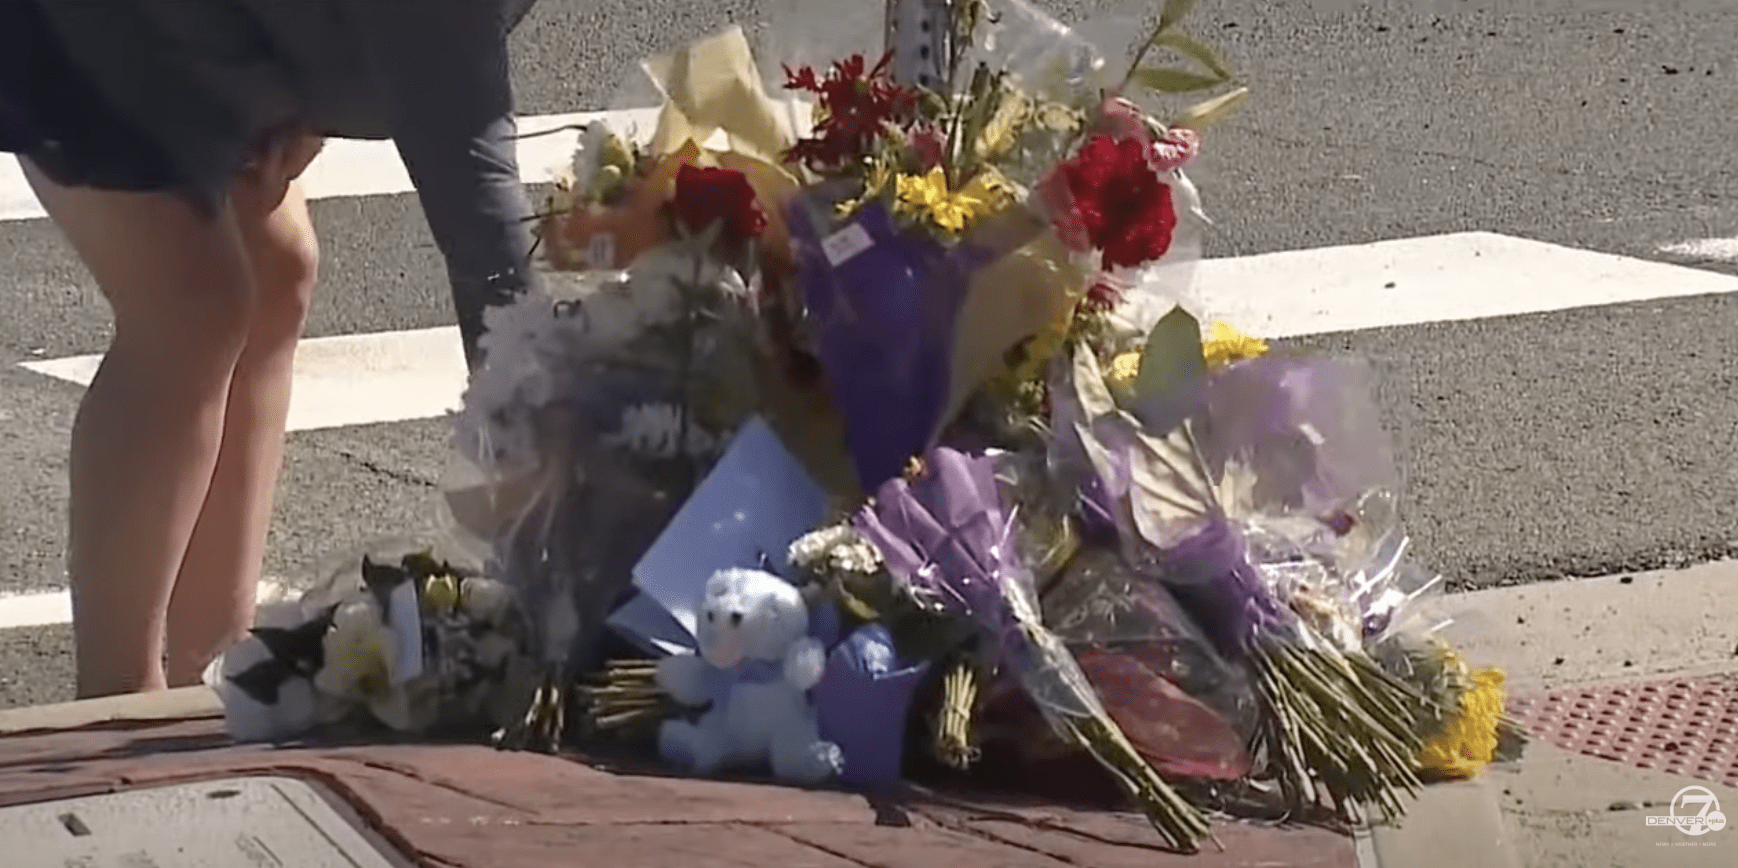 People leave flowers, stuffed toys and heartwarming notes for Austin in the median.  |  Source: YouTube.com/Denver 7 — The Denver Channel